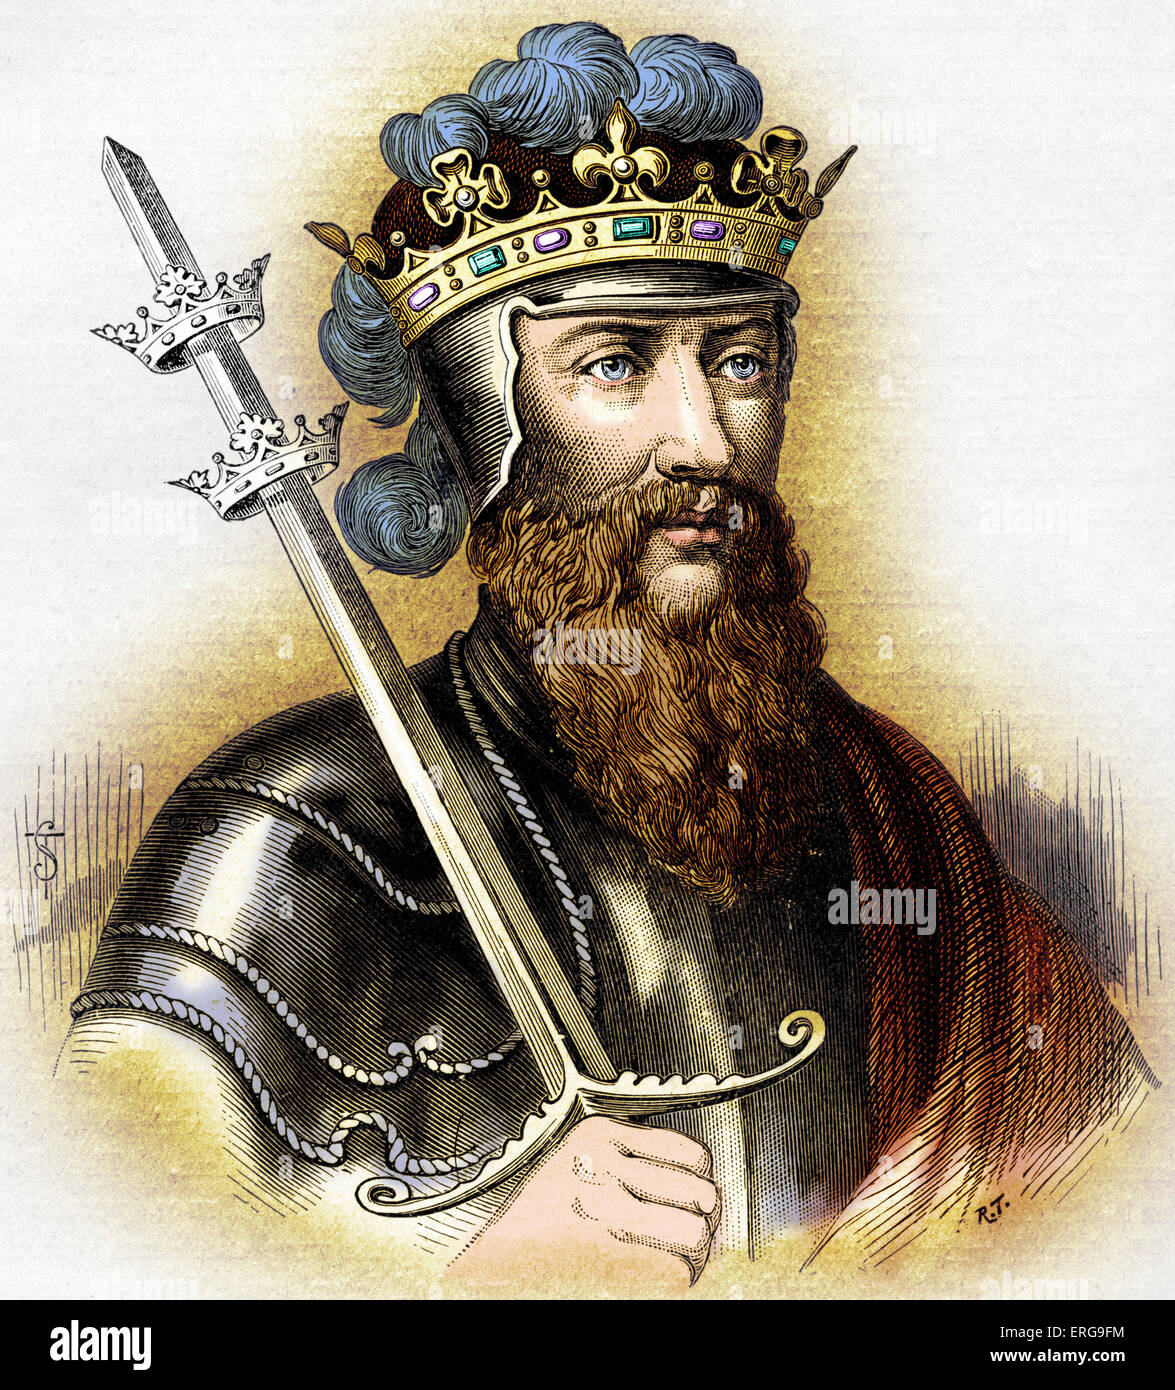 Edward III, King of England. His reign saw rise of England as efficiencet military power and of devlopment of  Parliament. 13 Stock Photo